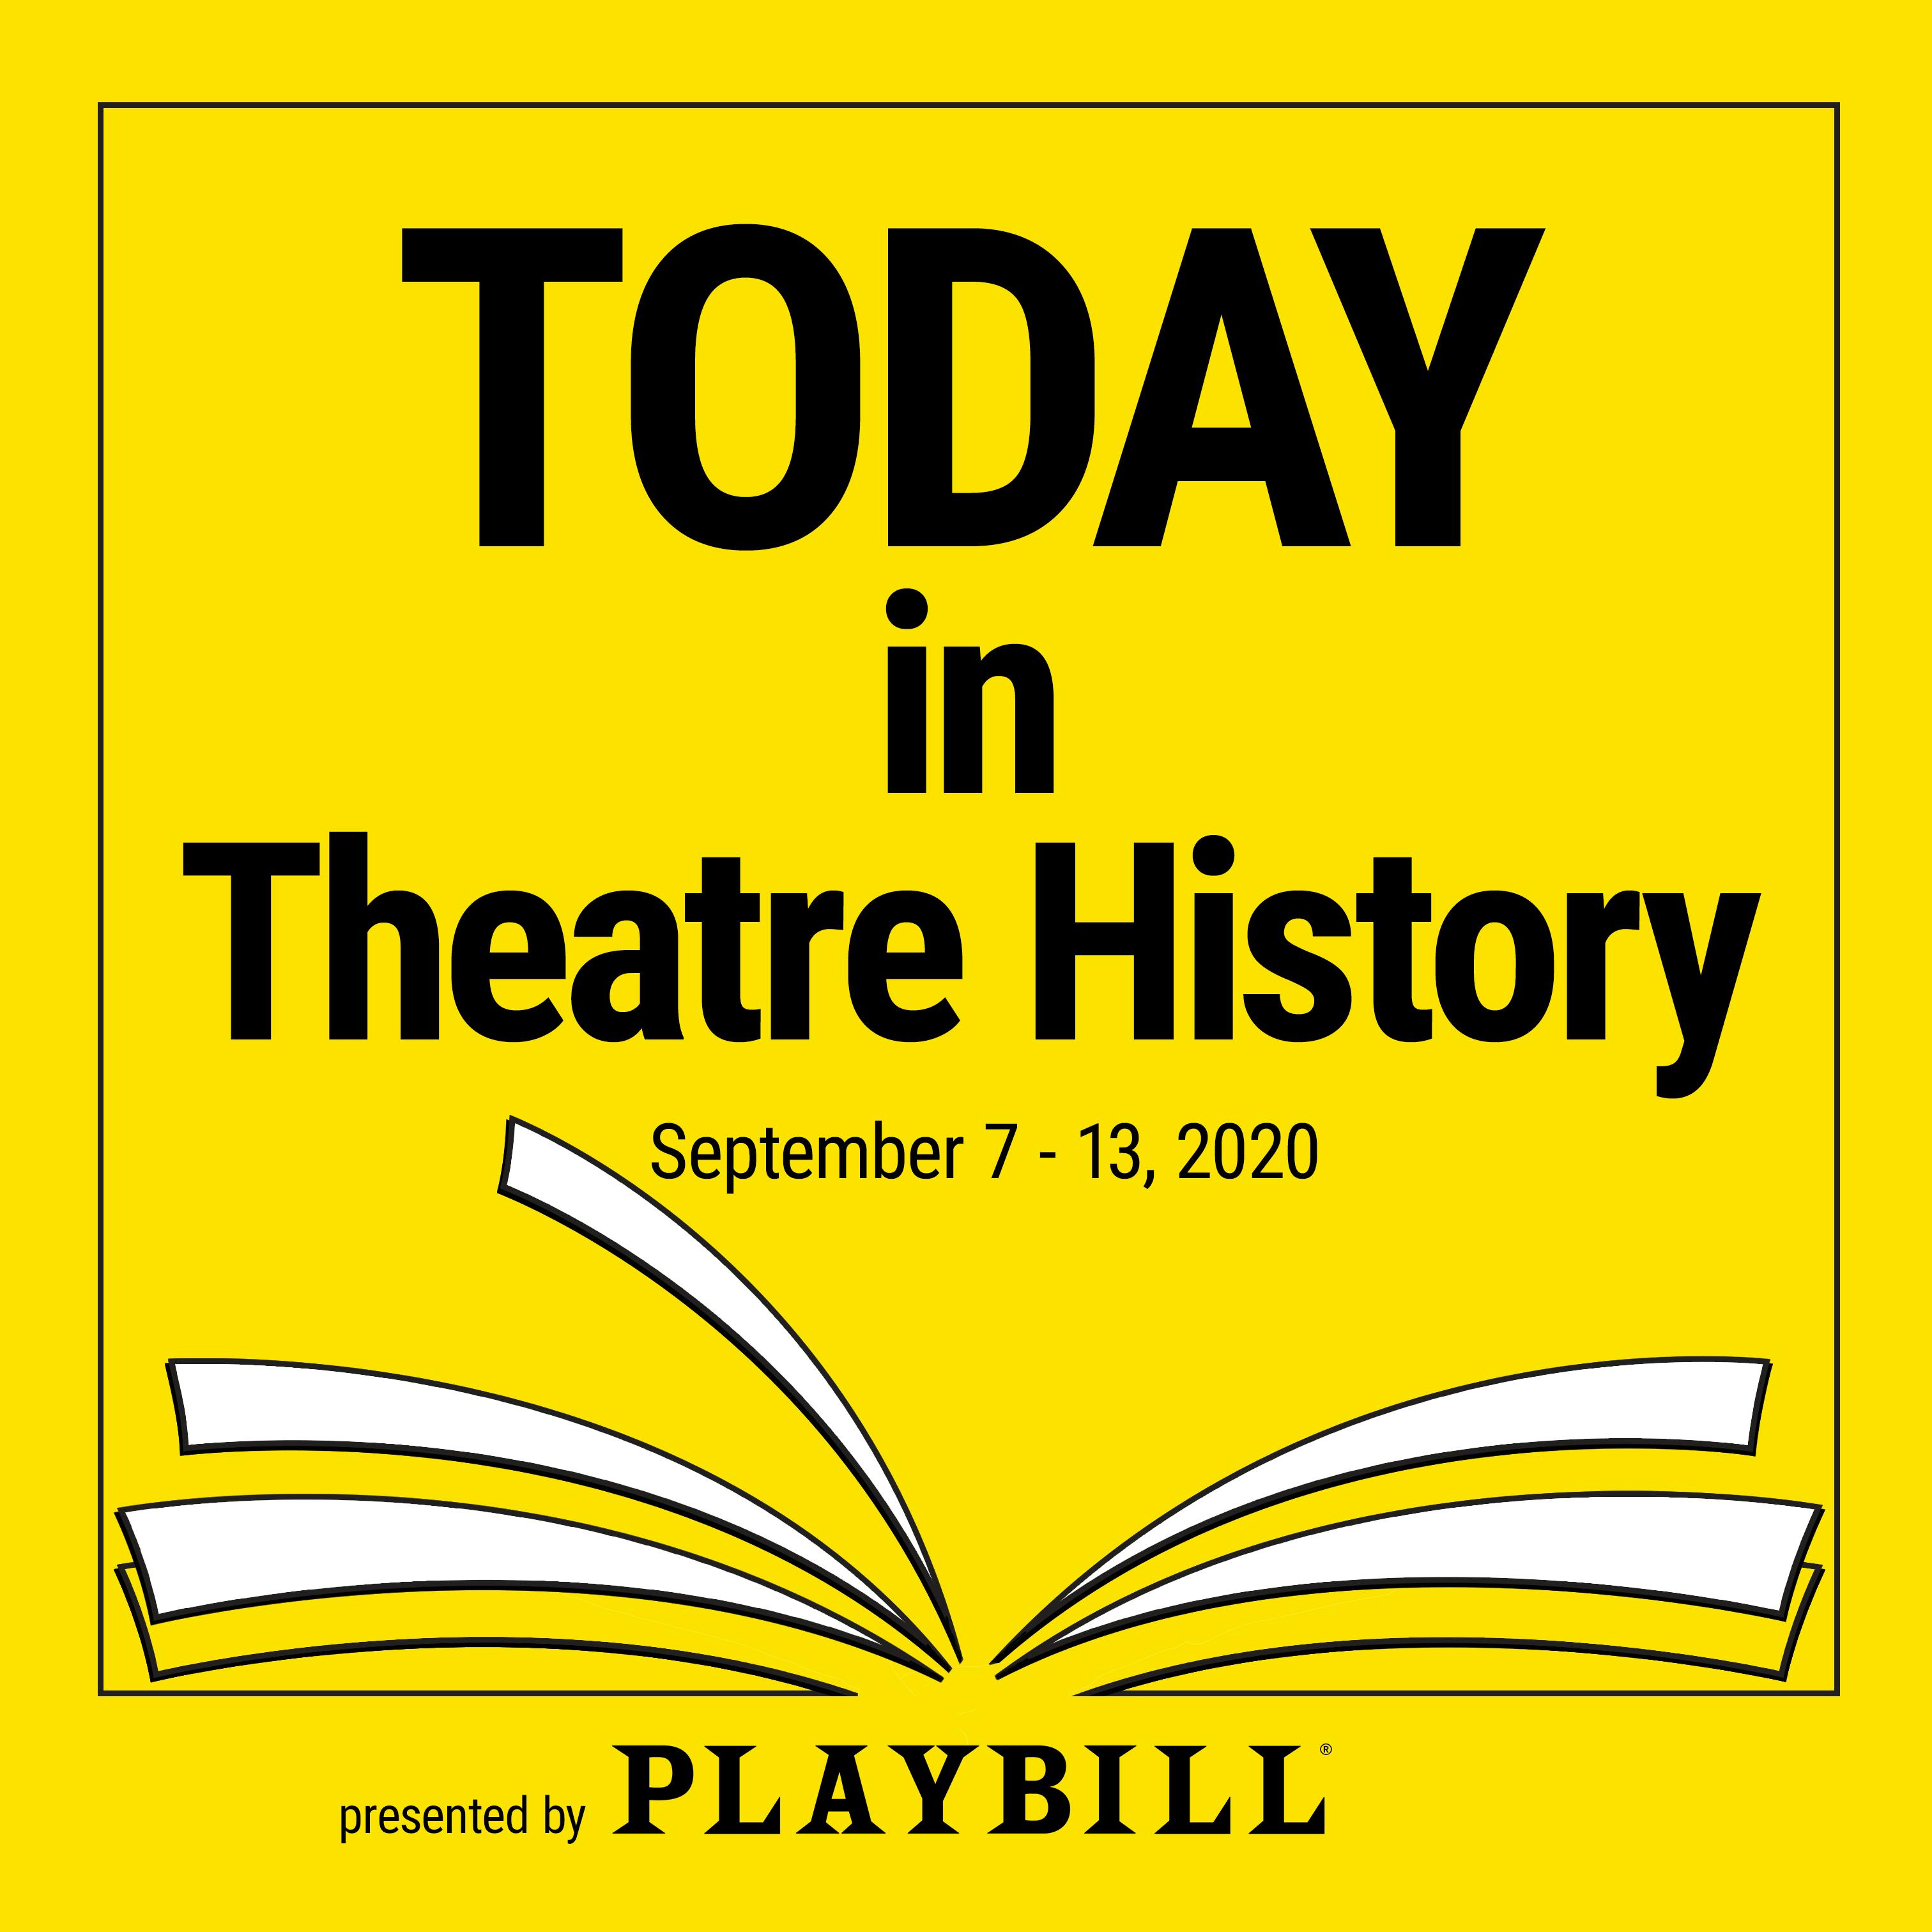 September 7–13, 2020: Rob McClure is Chaplin, Rent comes to an end, and Carnival in Flanders and The Man Who Reclaimed His Head both begin short Broadway runs.